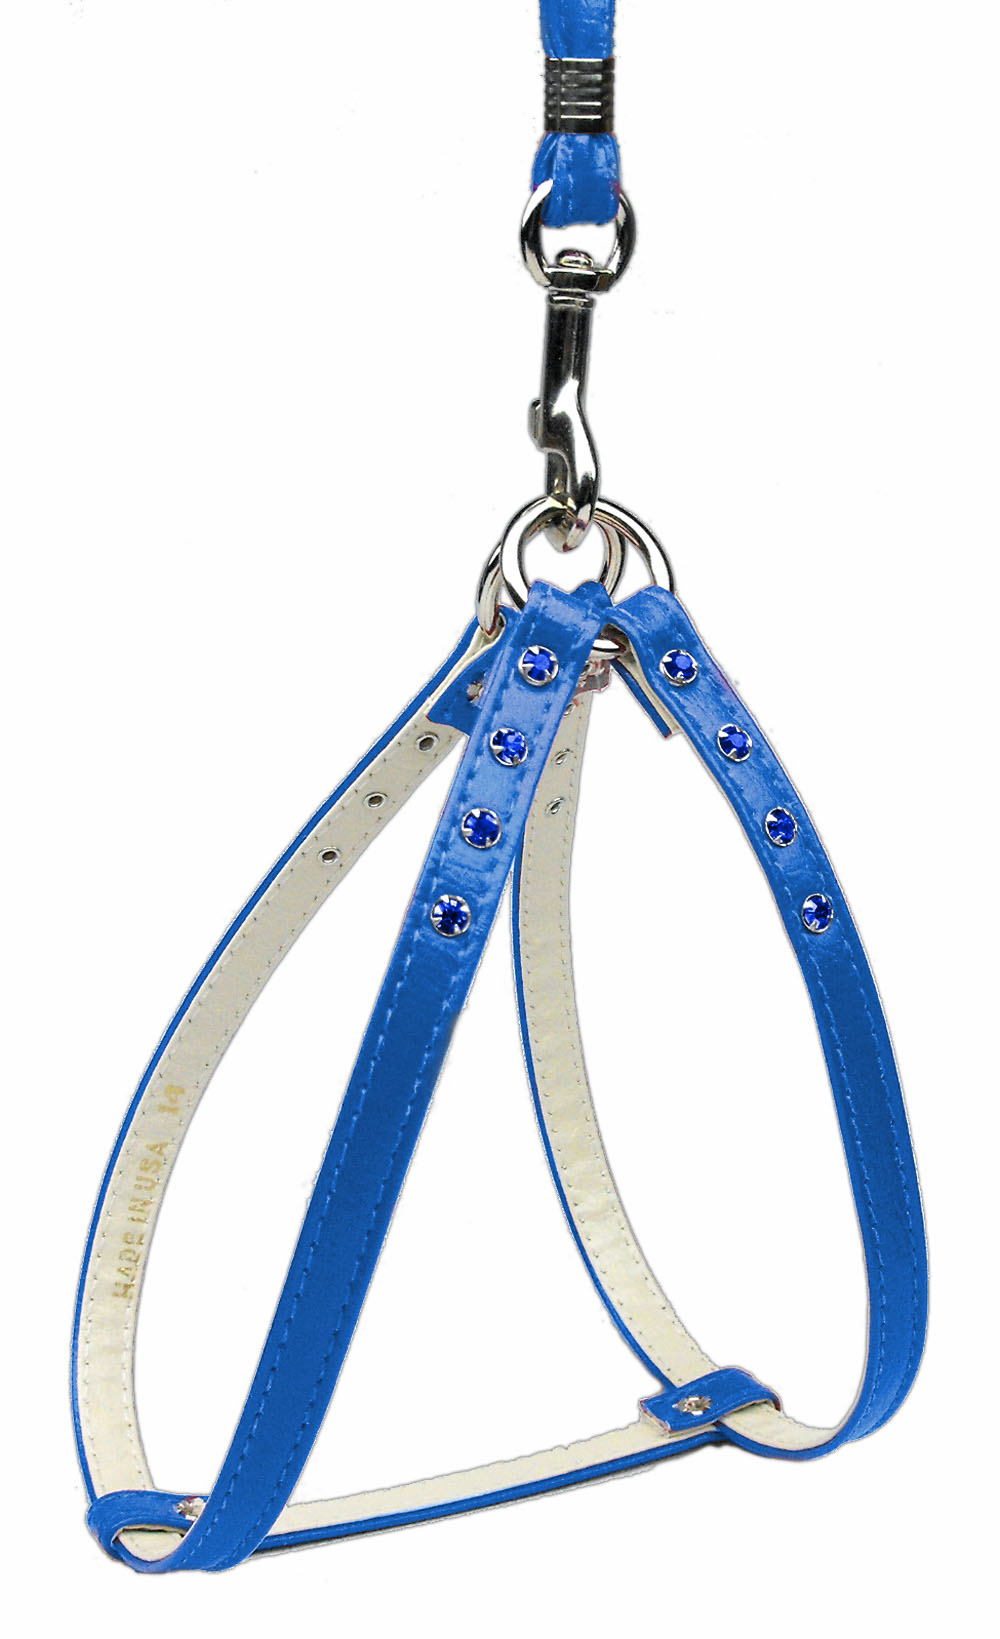 Step-In Harness Blue w/ Blue Stones 16